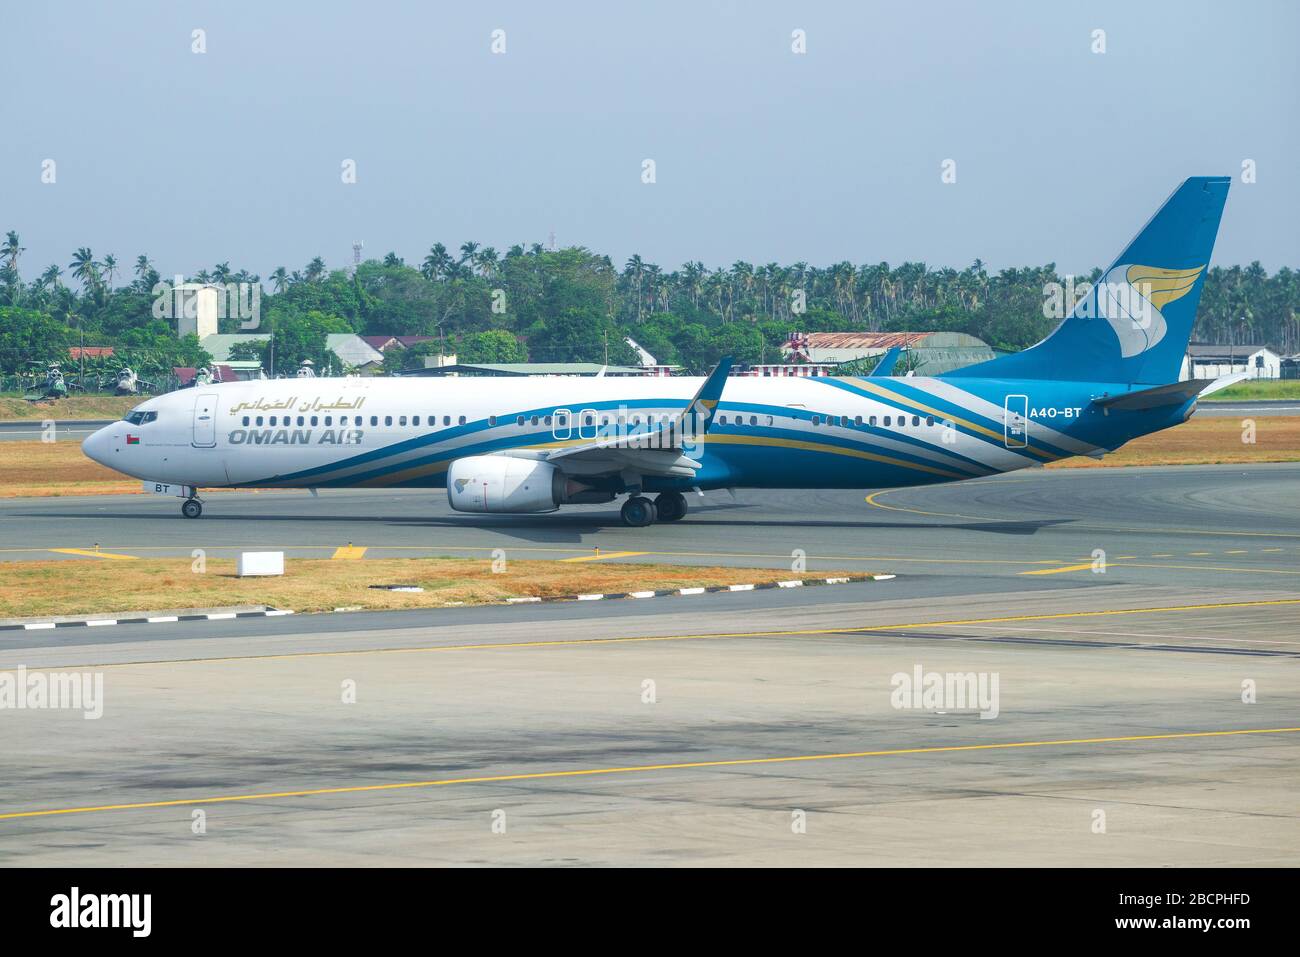 COLOMBO, SRI LANKA - FEBRUARY 24, 2020: Boeing 737-91M (A4O-BT) airline Oman Air on the taxiway of Bandaranaike Airport Stock Photo